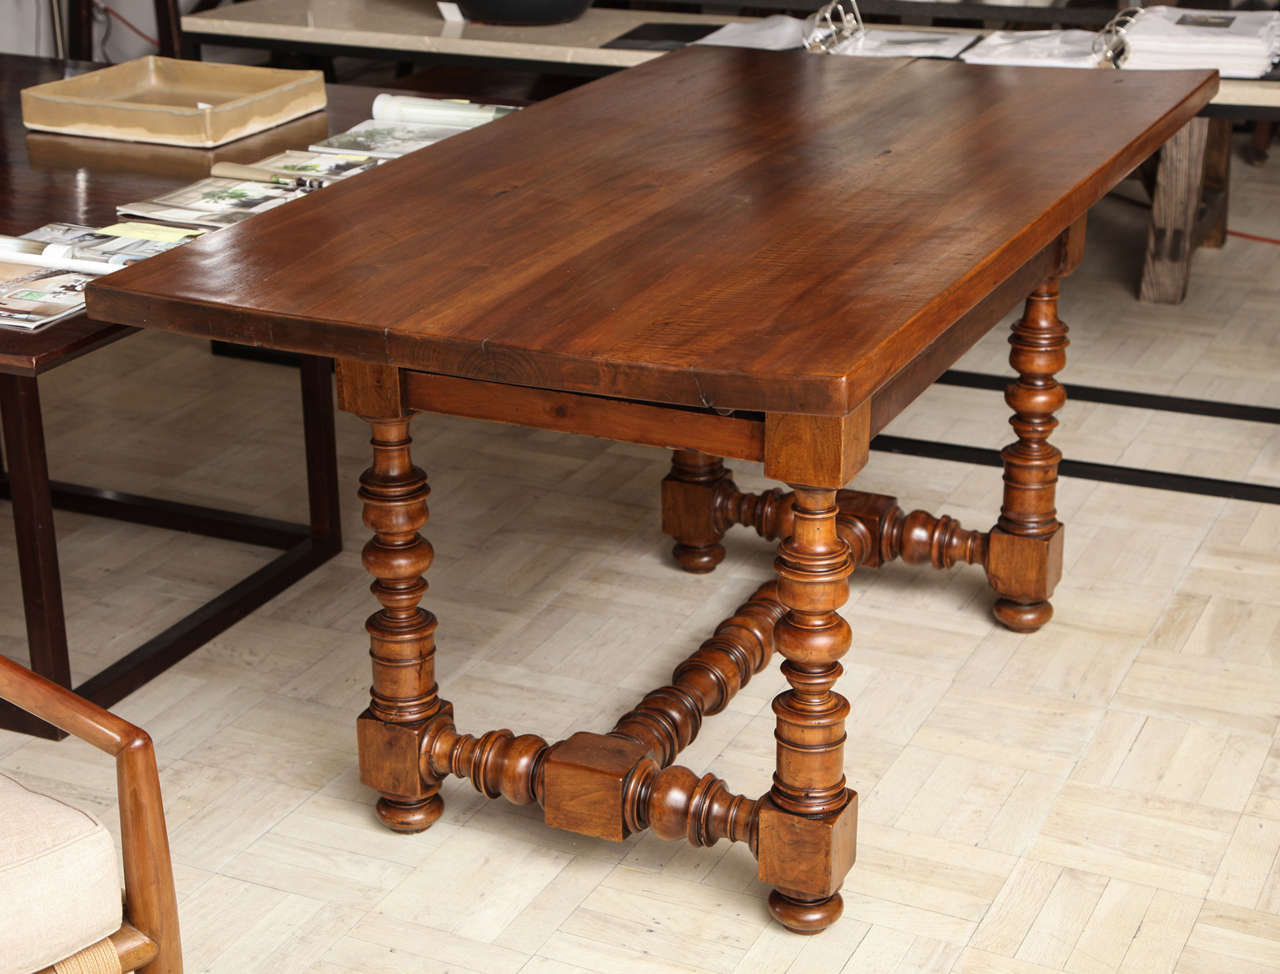 Late 18th-early 19th century walnut library table with rectangular molded top, one long drawer in apron.